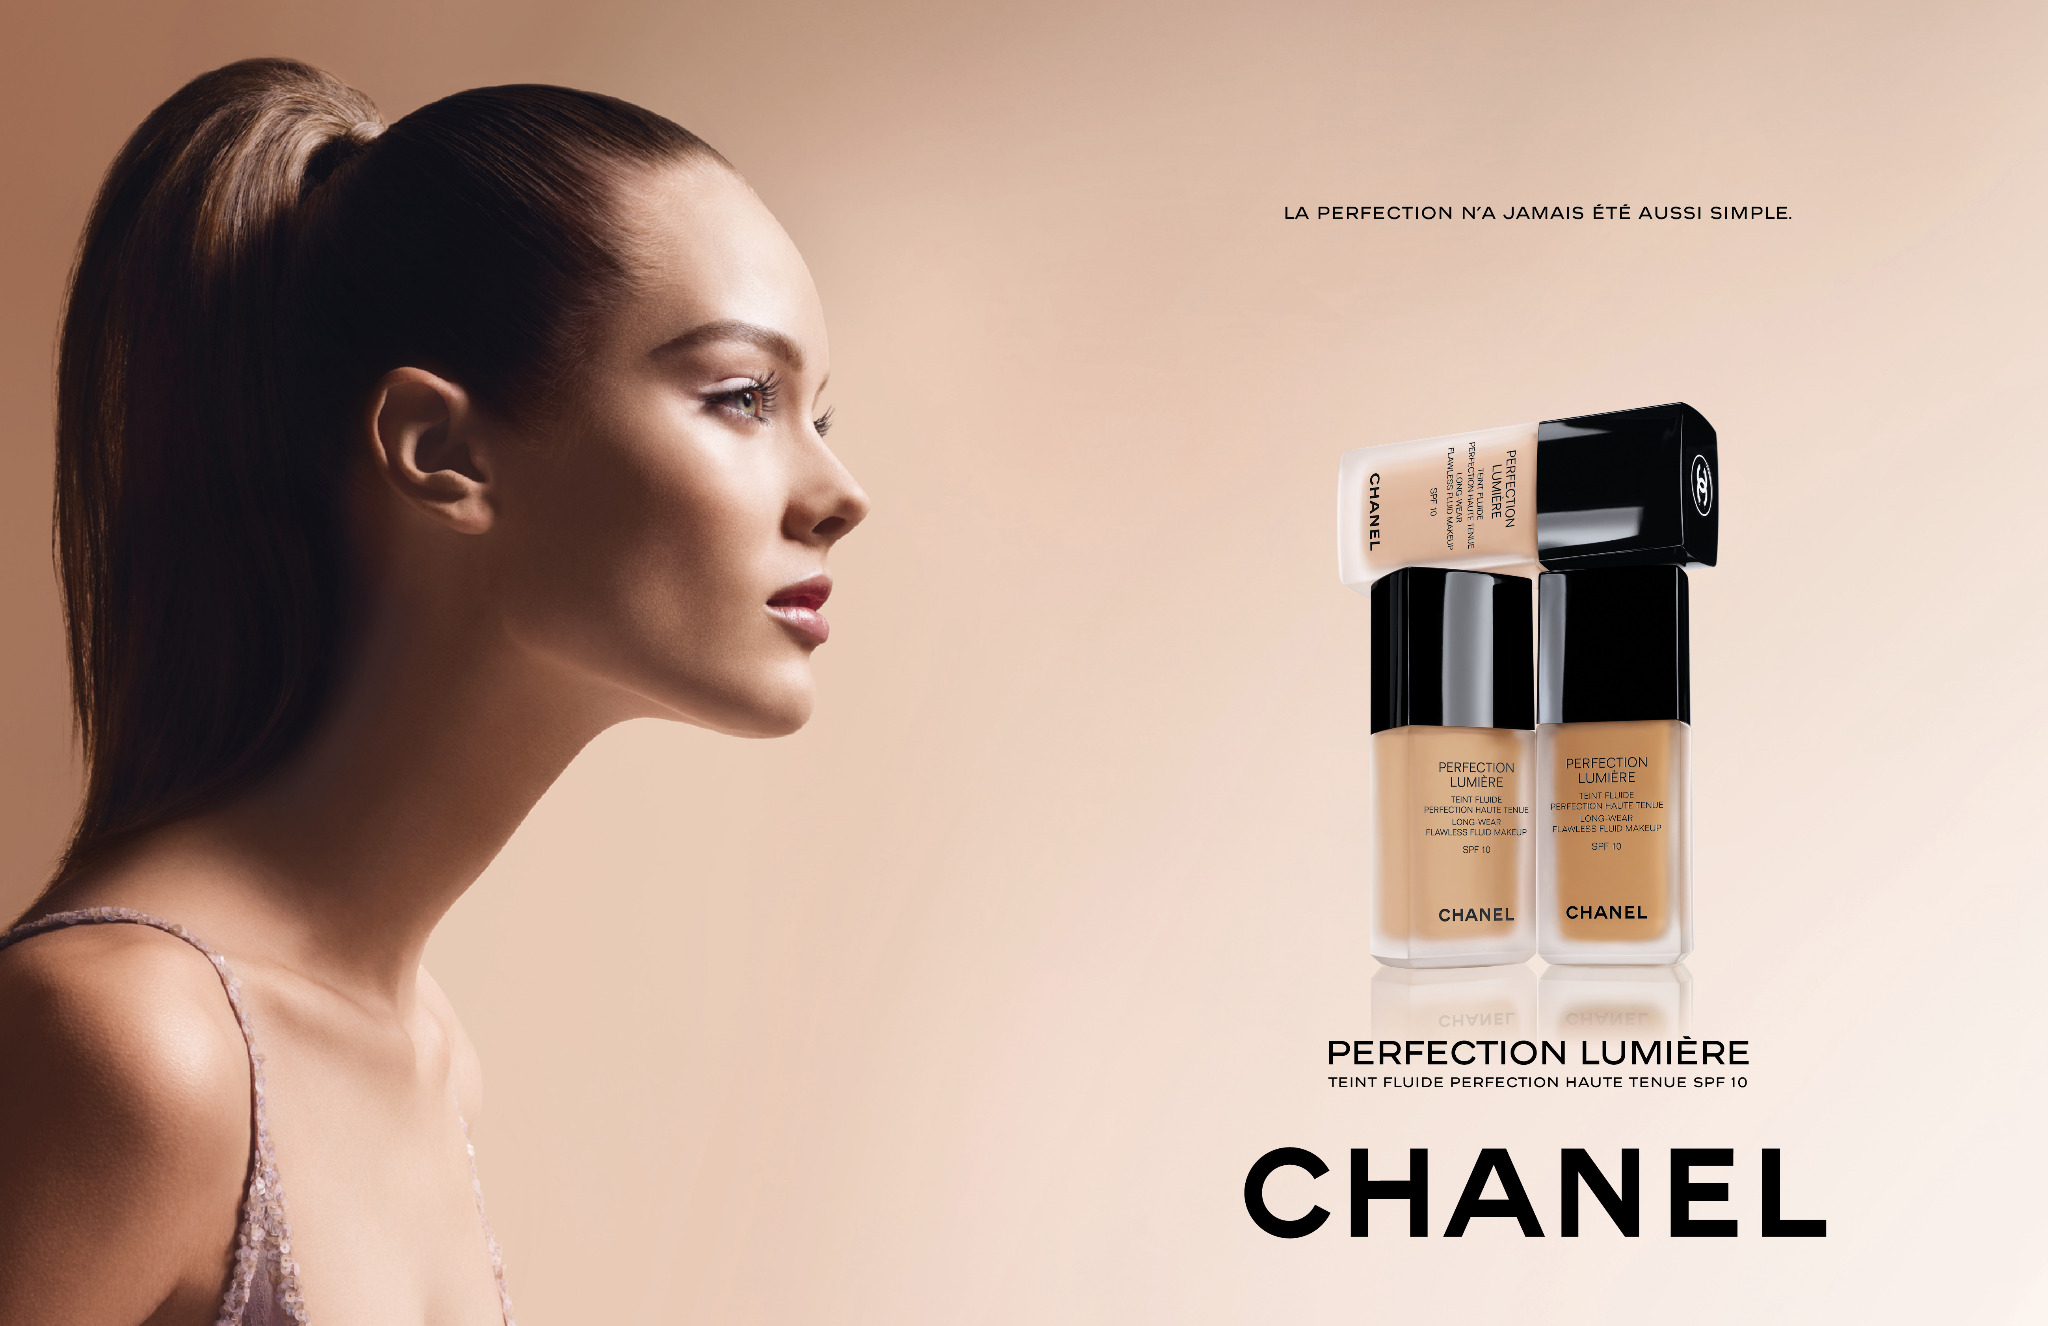 CHANEL on Twitter: "Introducing PERFECTION LUMIÈRE, the all-day natural-finish foundation for a flattering http://t.co/hk287W6G" / Twitter